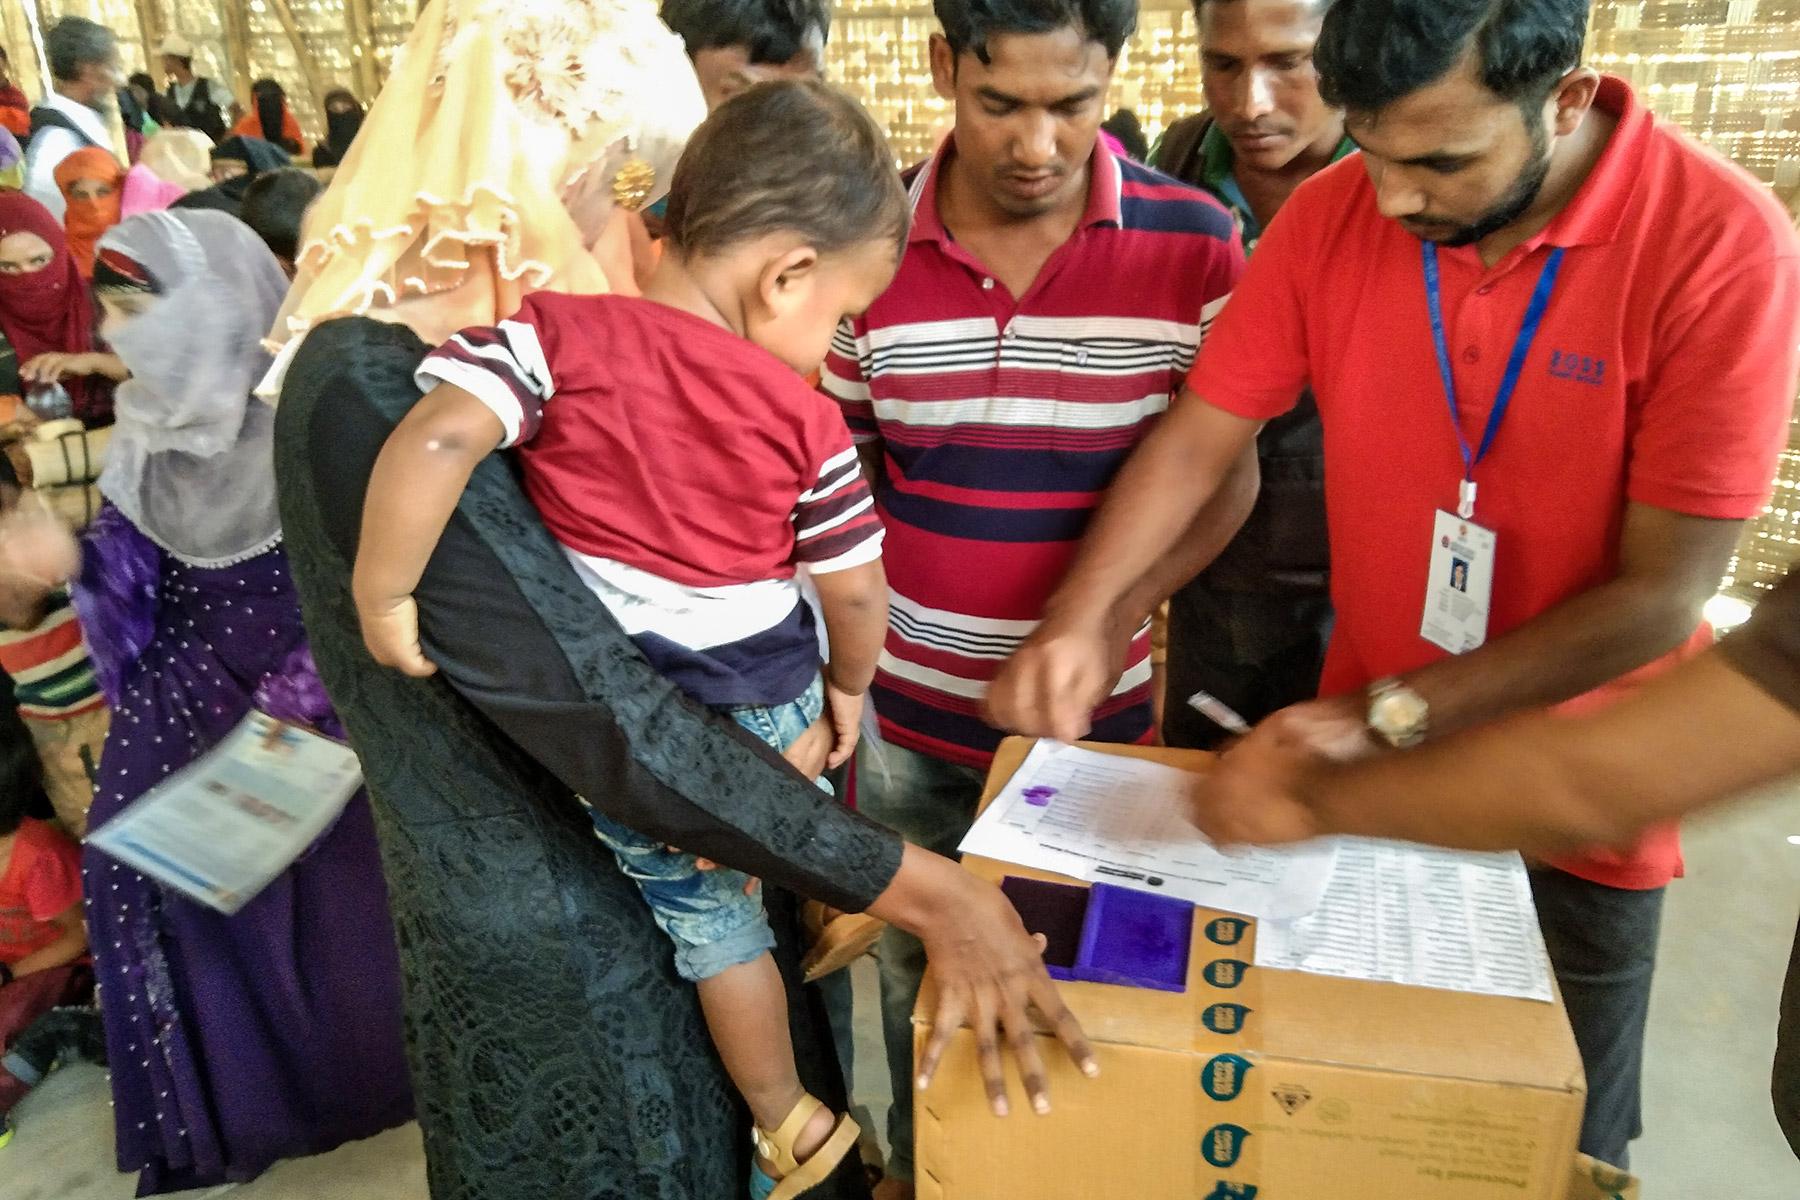 A refugee mother offers her finger print to receive supplementary food items in the refugee camp #18 in Coxâs Bazaar, Bangladesh. Photo: LWF Nepal/Bhoj Raj Khanal